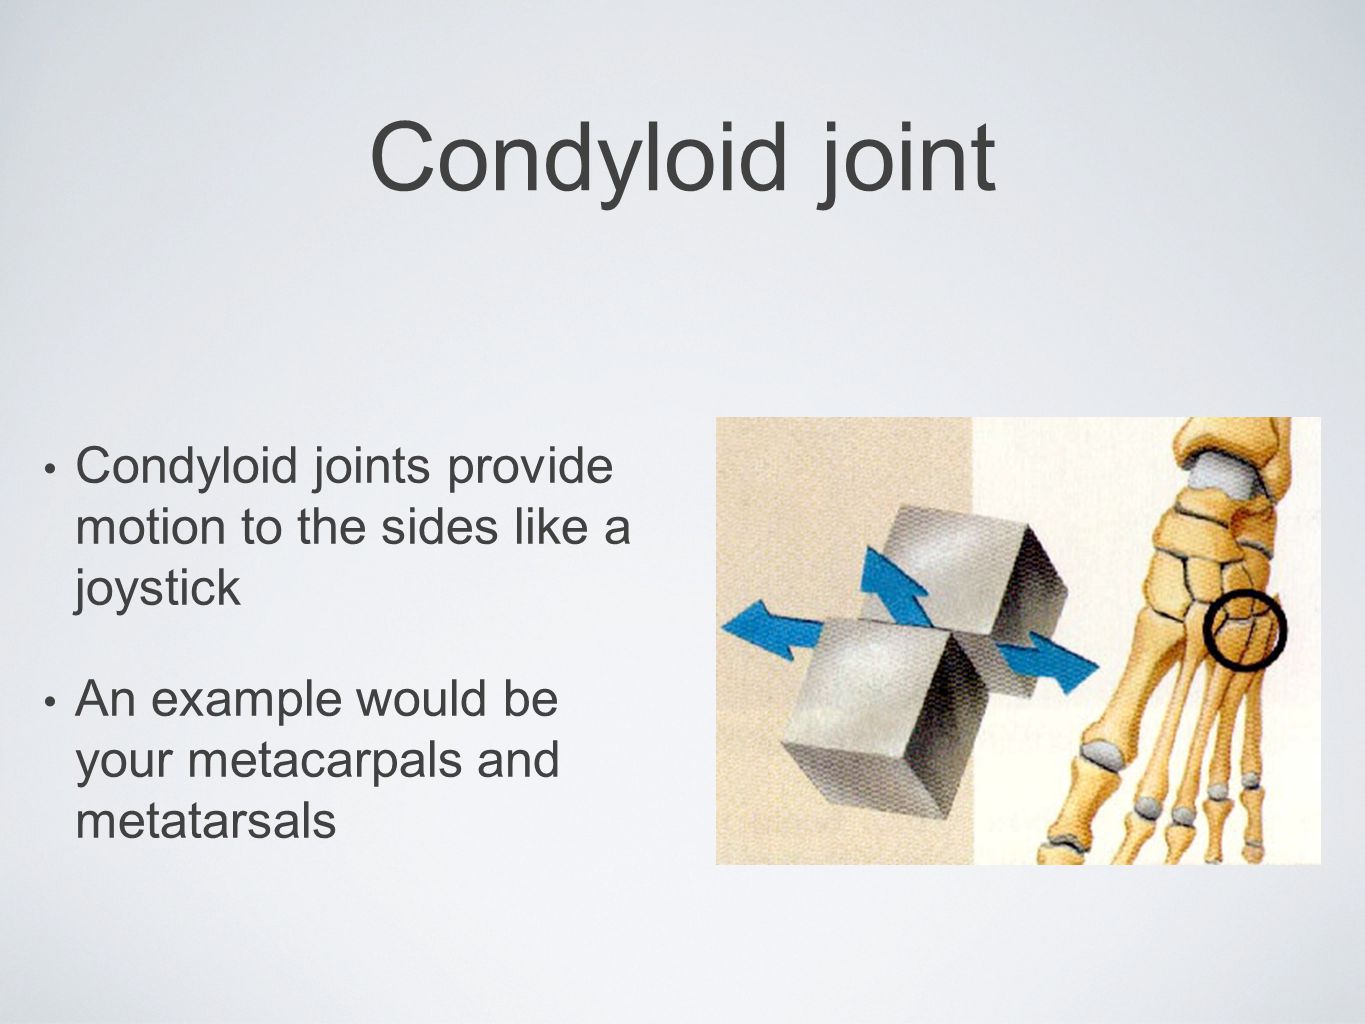 Condyloid joint Condyloid joints provide motion to the sides like a joystick.